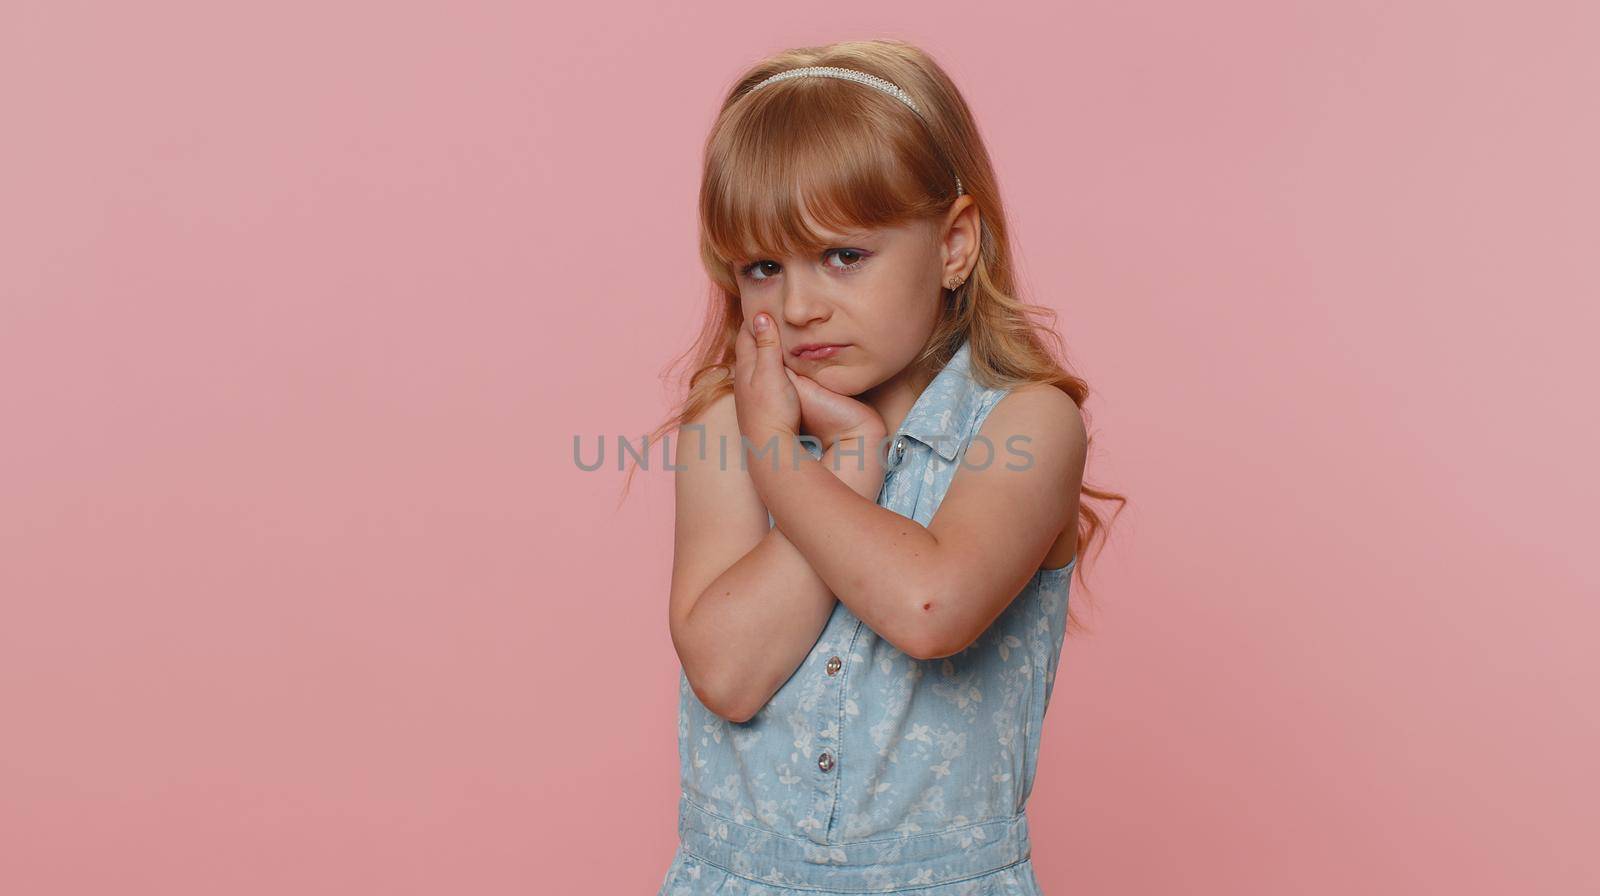 Dental problems. Young preteen child girl kid touching cheek, closing eyes with expression of terrible suffer from painful toothache, sensitive teeth, cavities. Toddler children on pink background